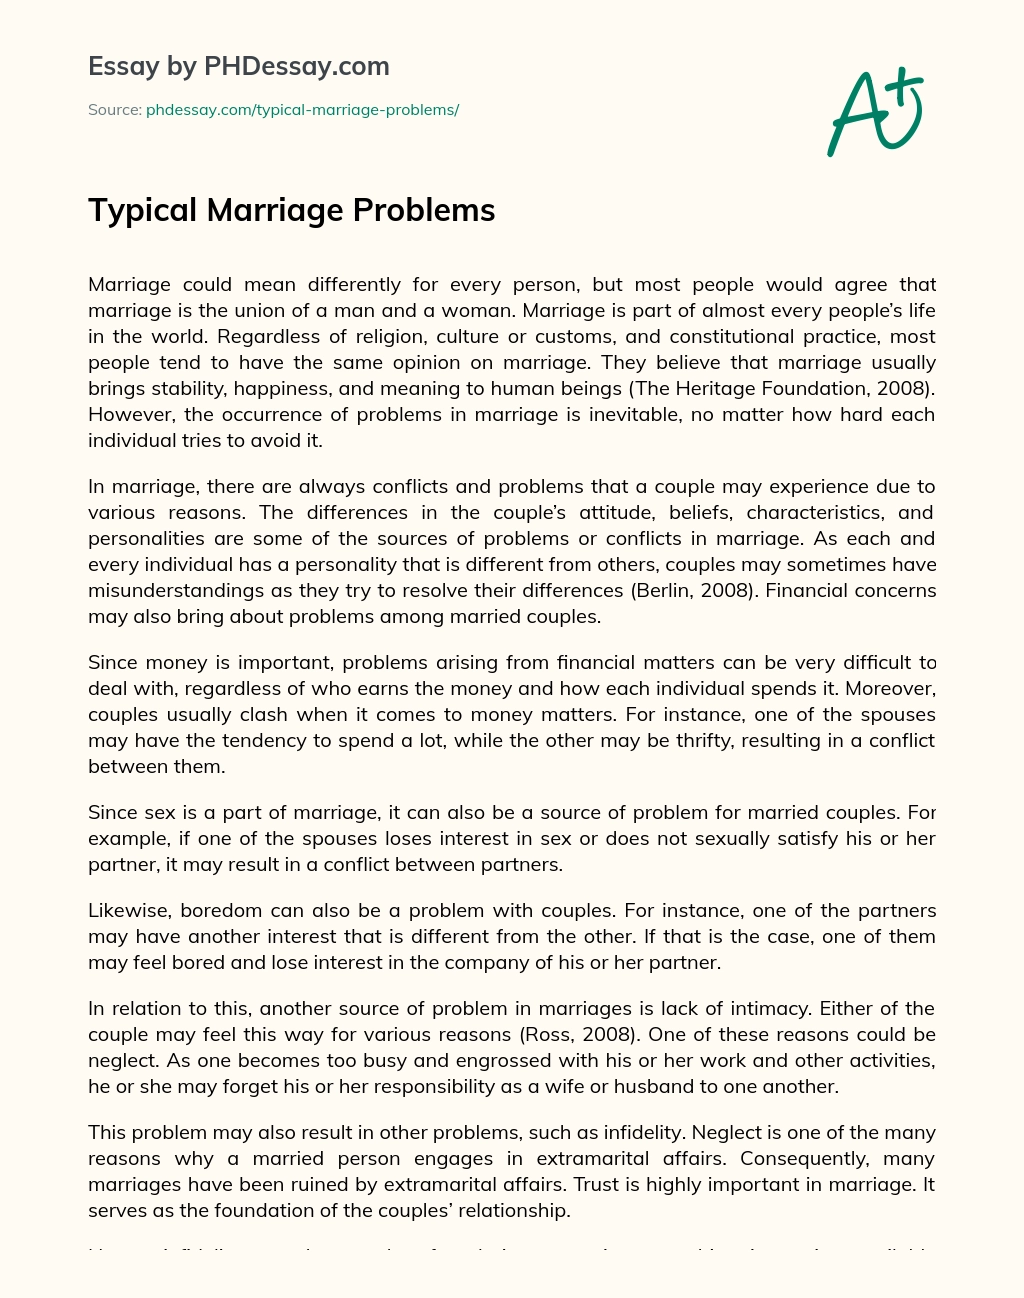 Typical Marriage Problems essay